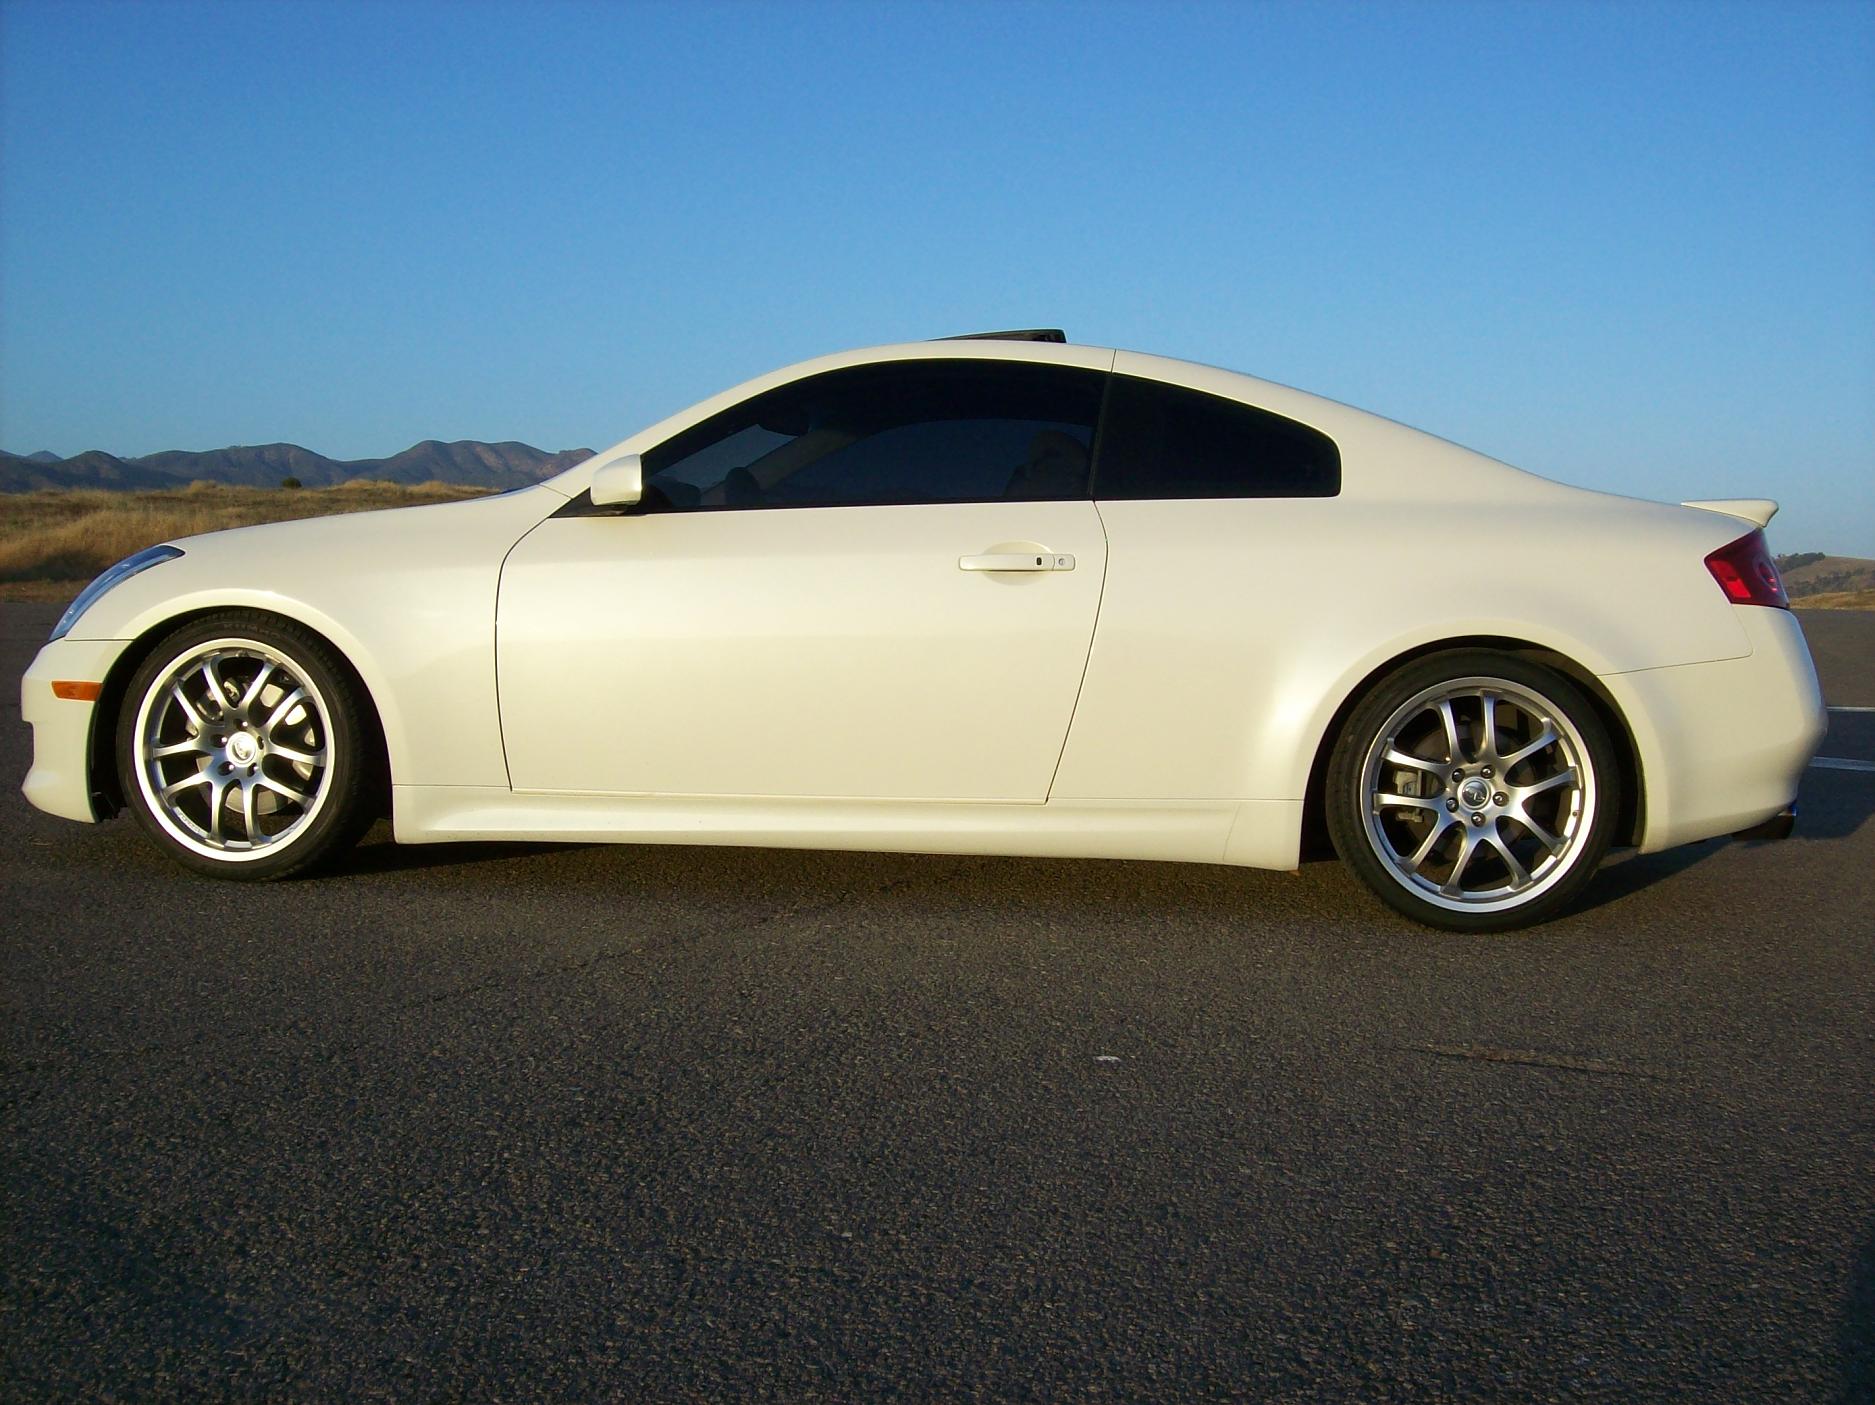 pic requst: tein S-tech vs H-tech on g35 coupe.